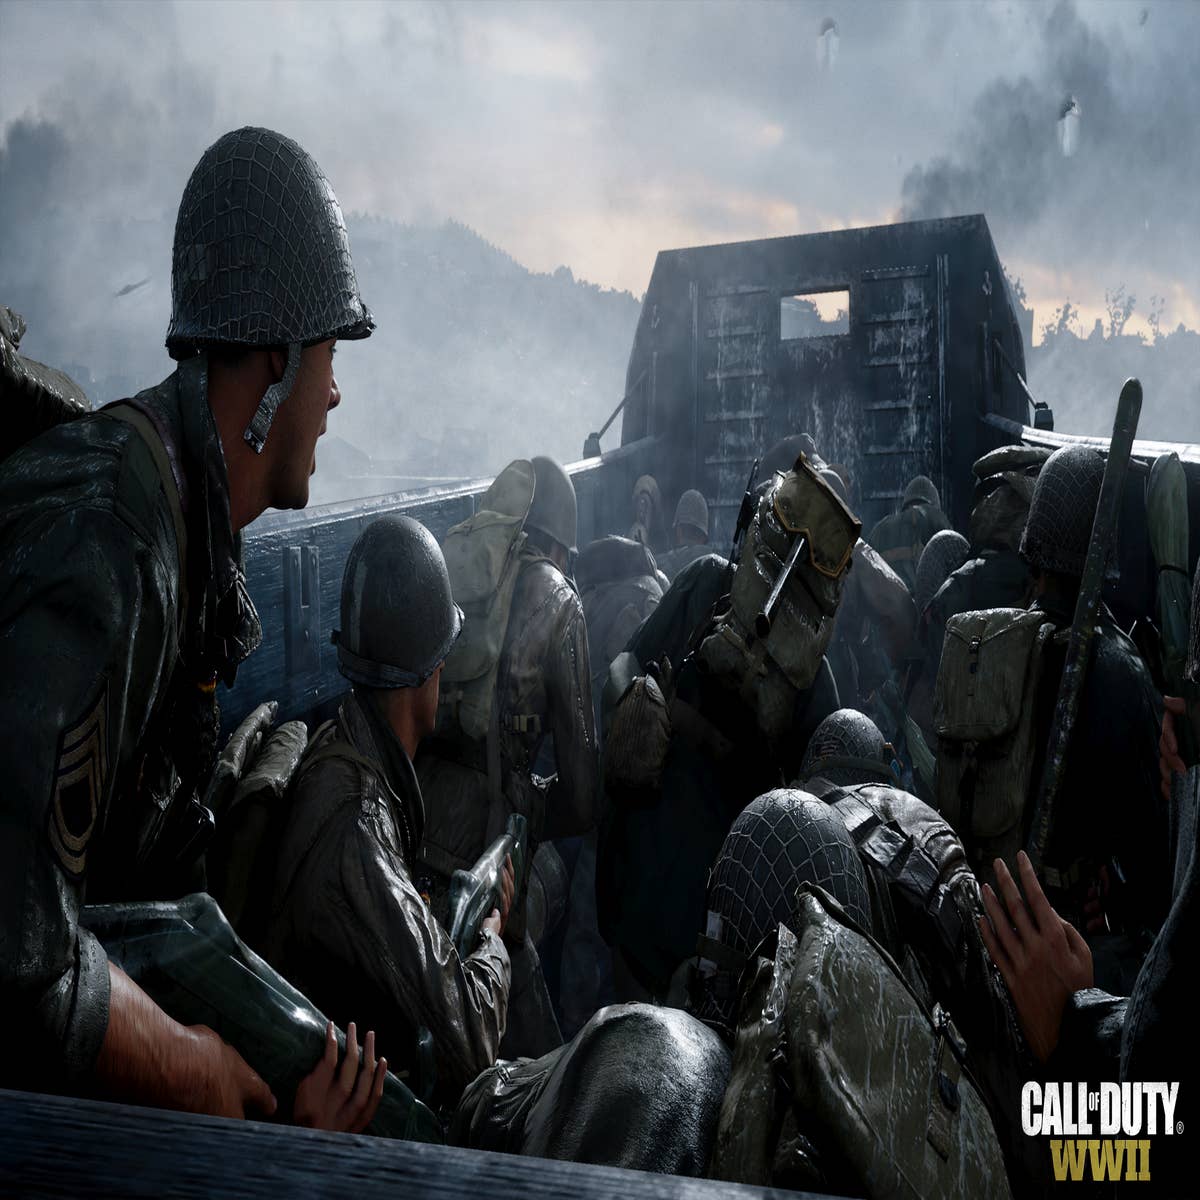 Call of Duty: WWII beta is number 5 on the Steam player count list